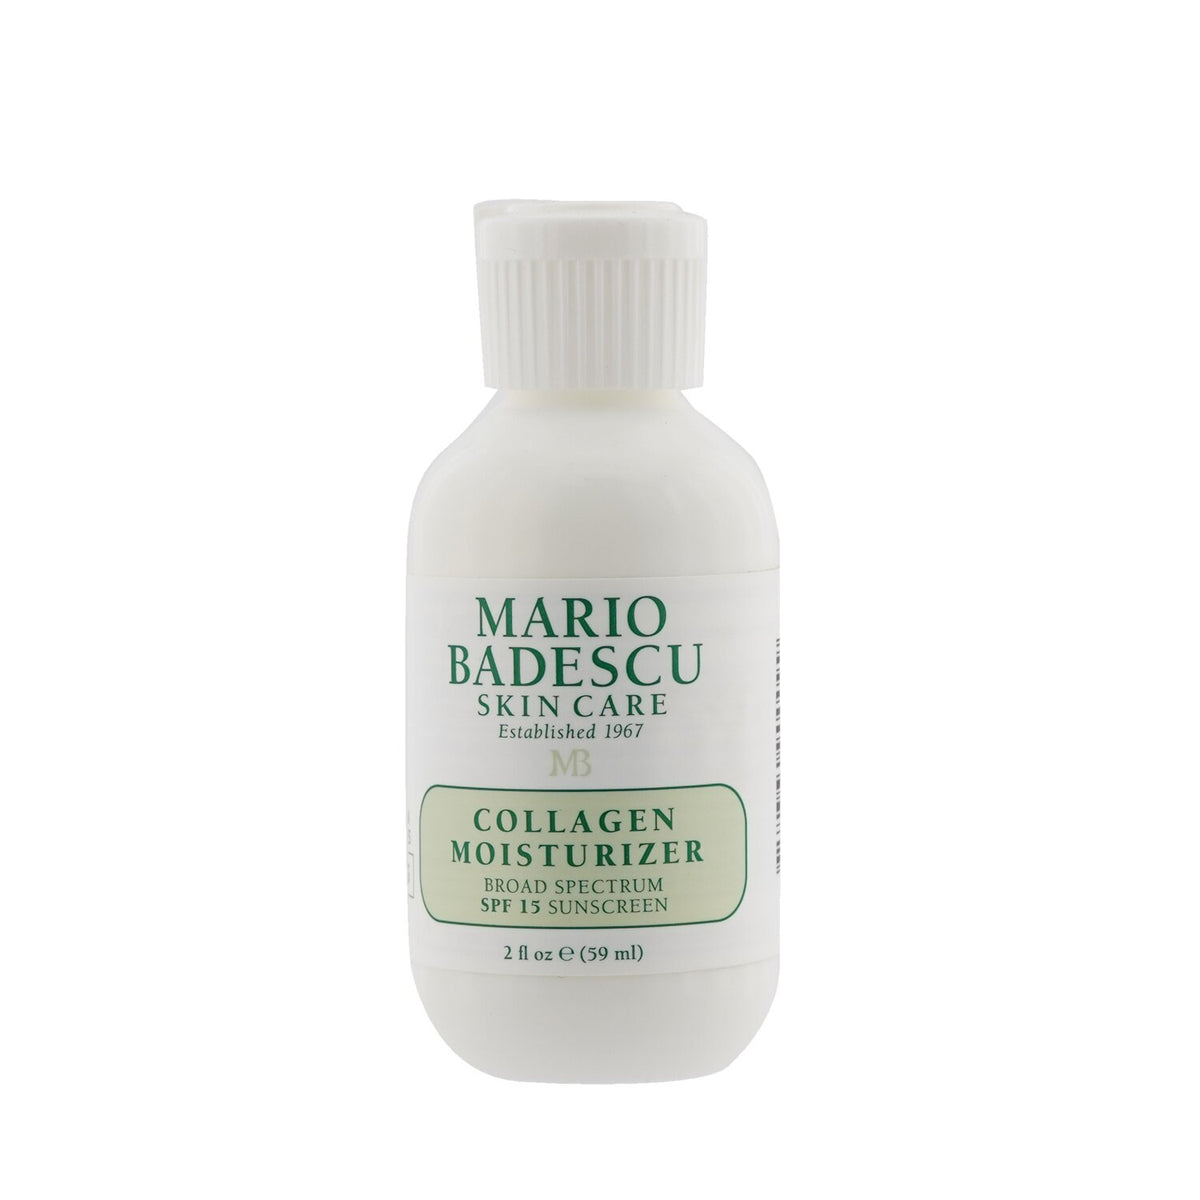 Collagen Moisturizer 15 For Combination/ Sensitive Skin Types for Sale | Mario Badescu, Skincare, Buy Now – Author